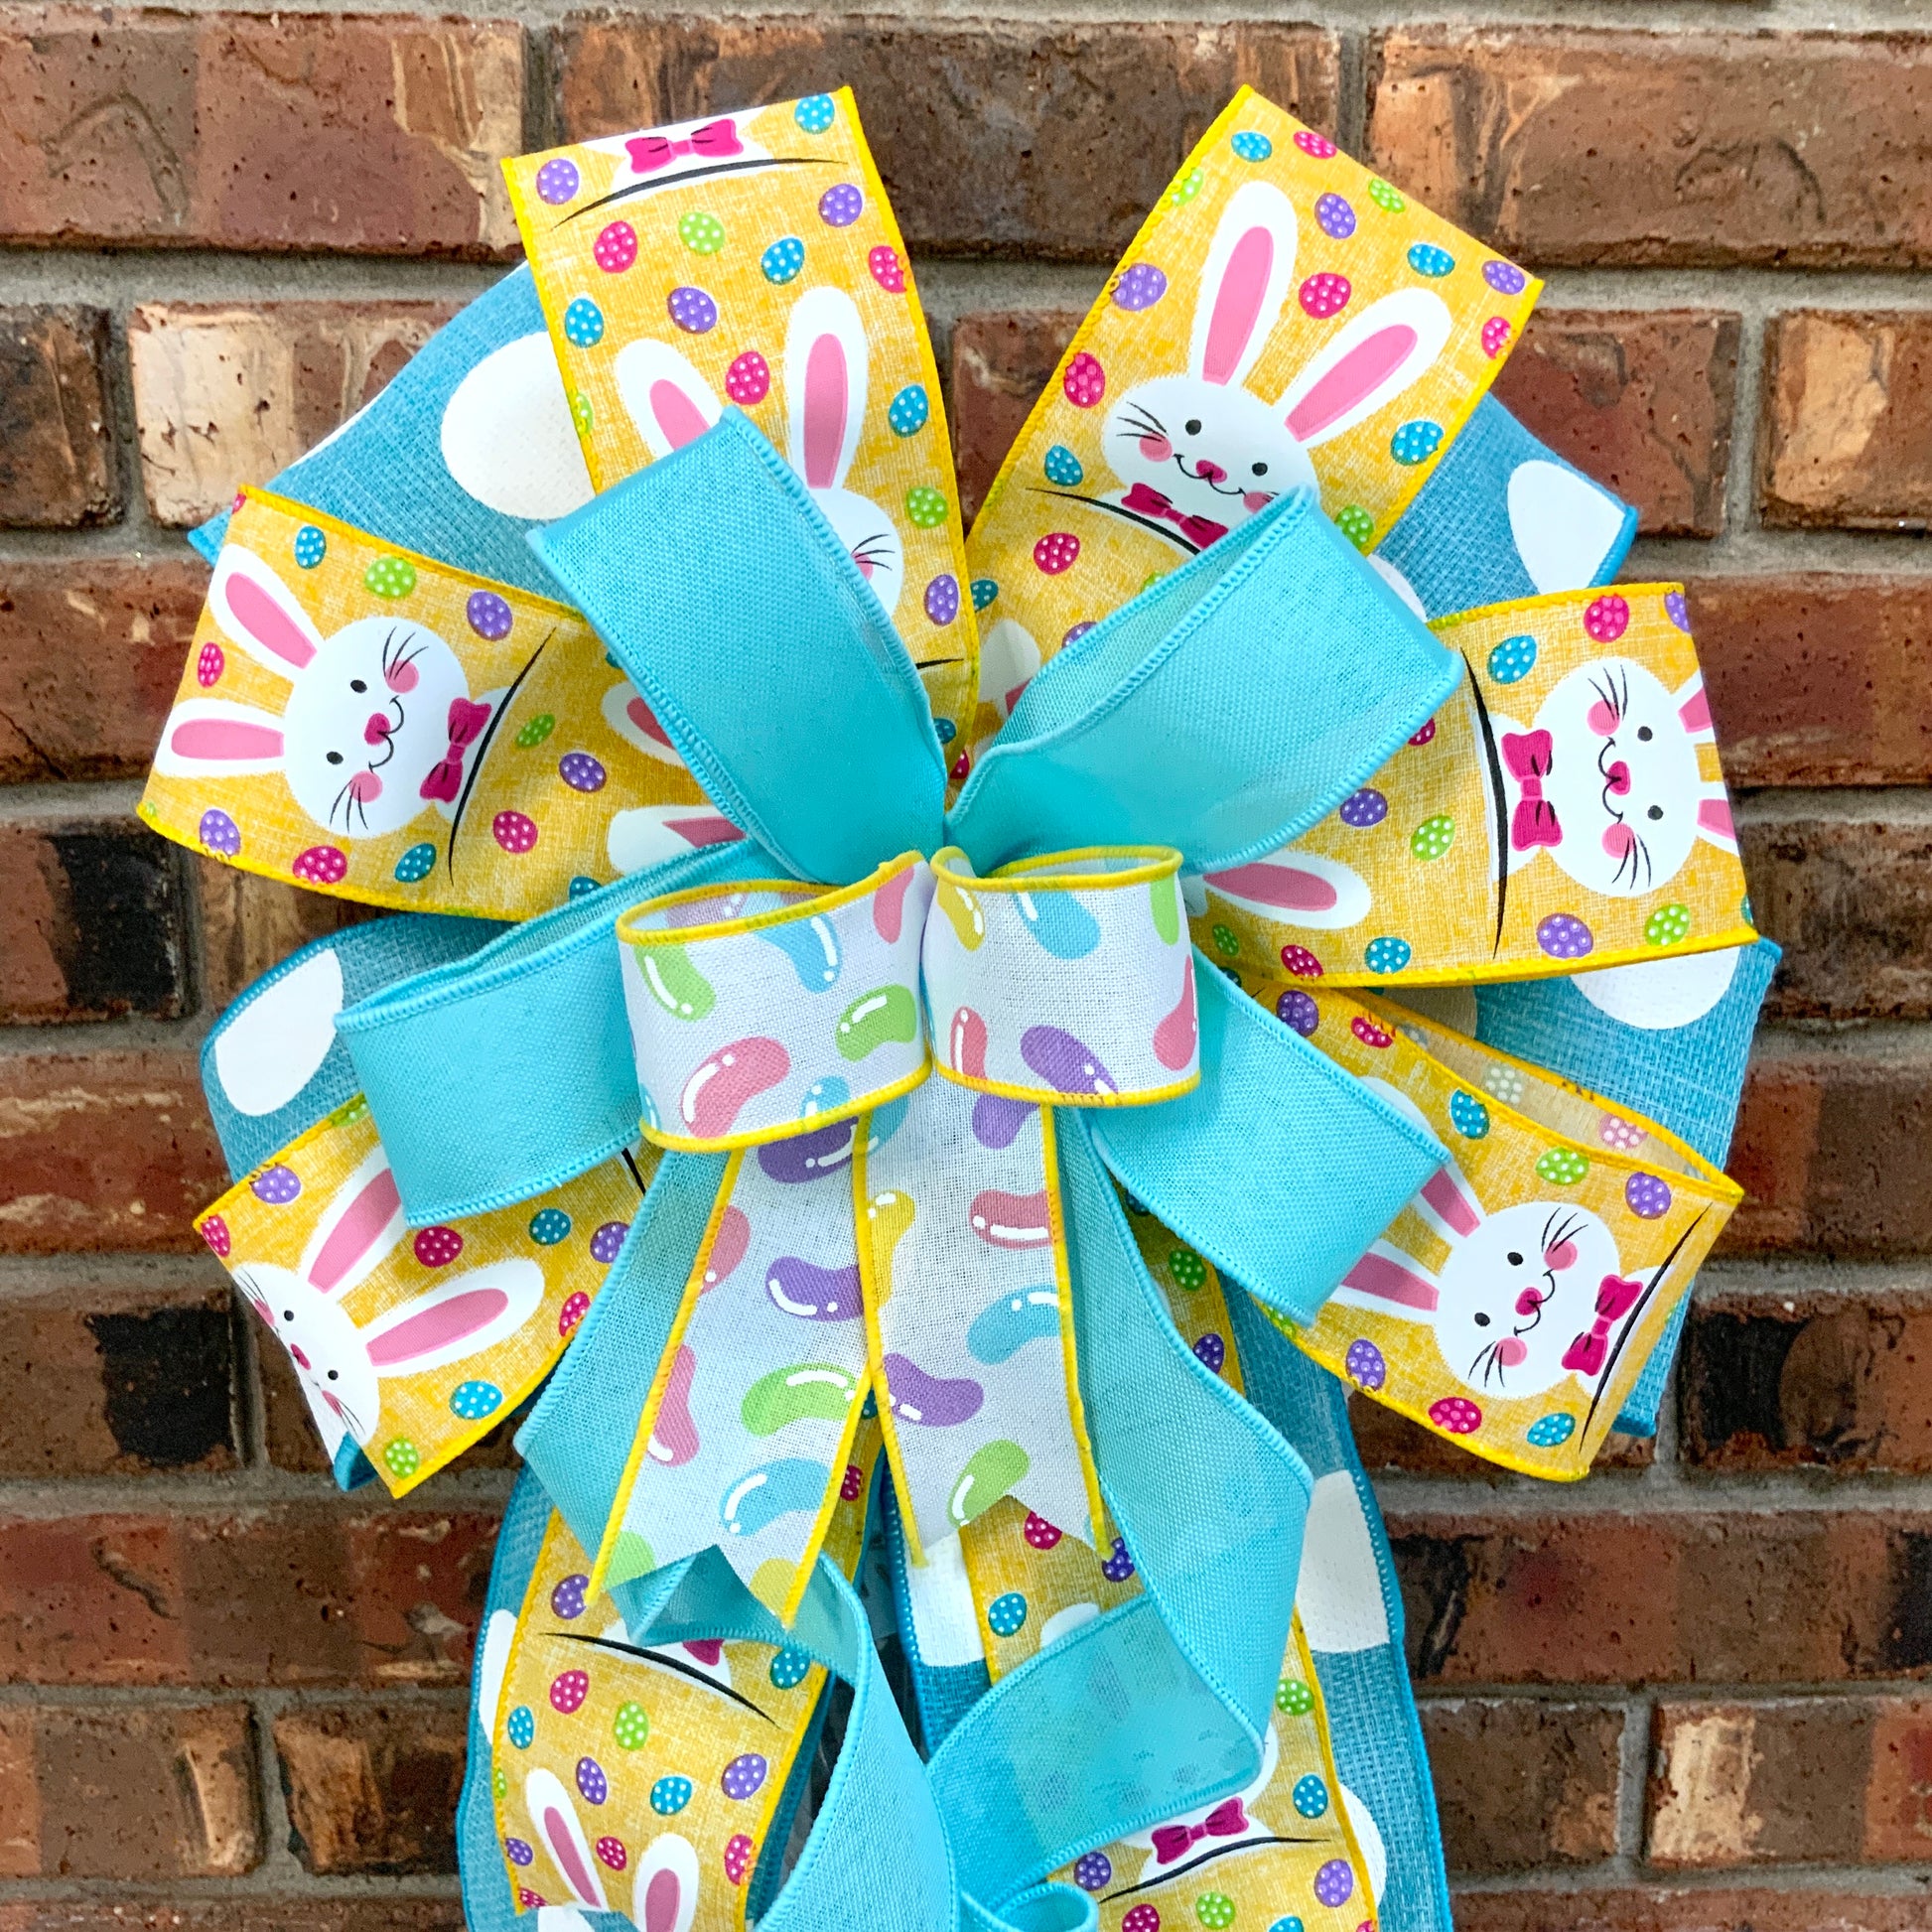 Spring Bows - Easter Bows - Wired Easter Bunnies & Eggs Natural Bow 8